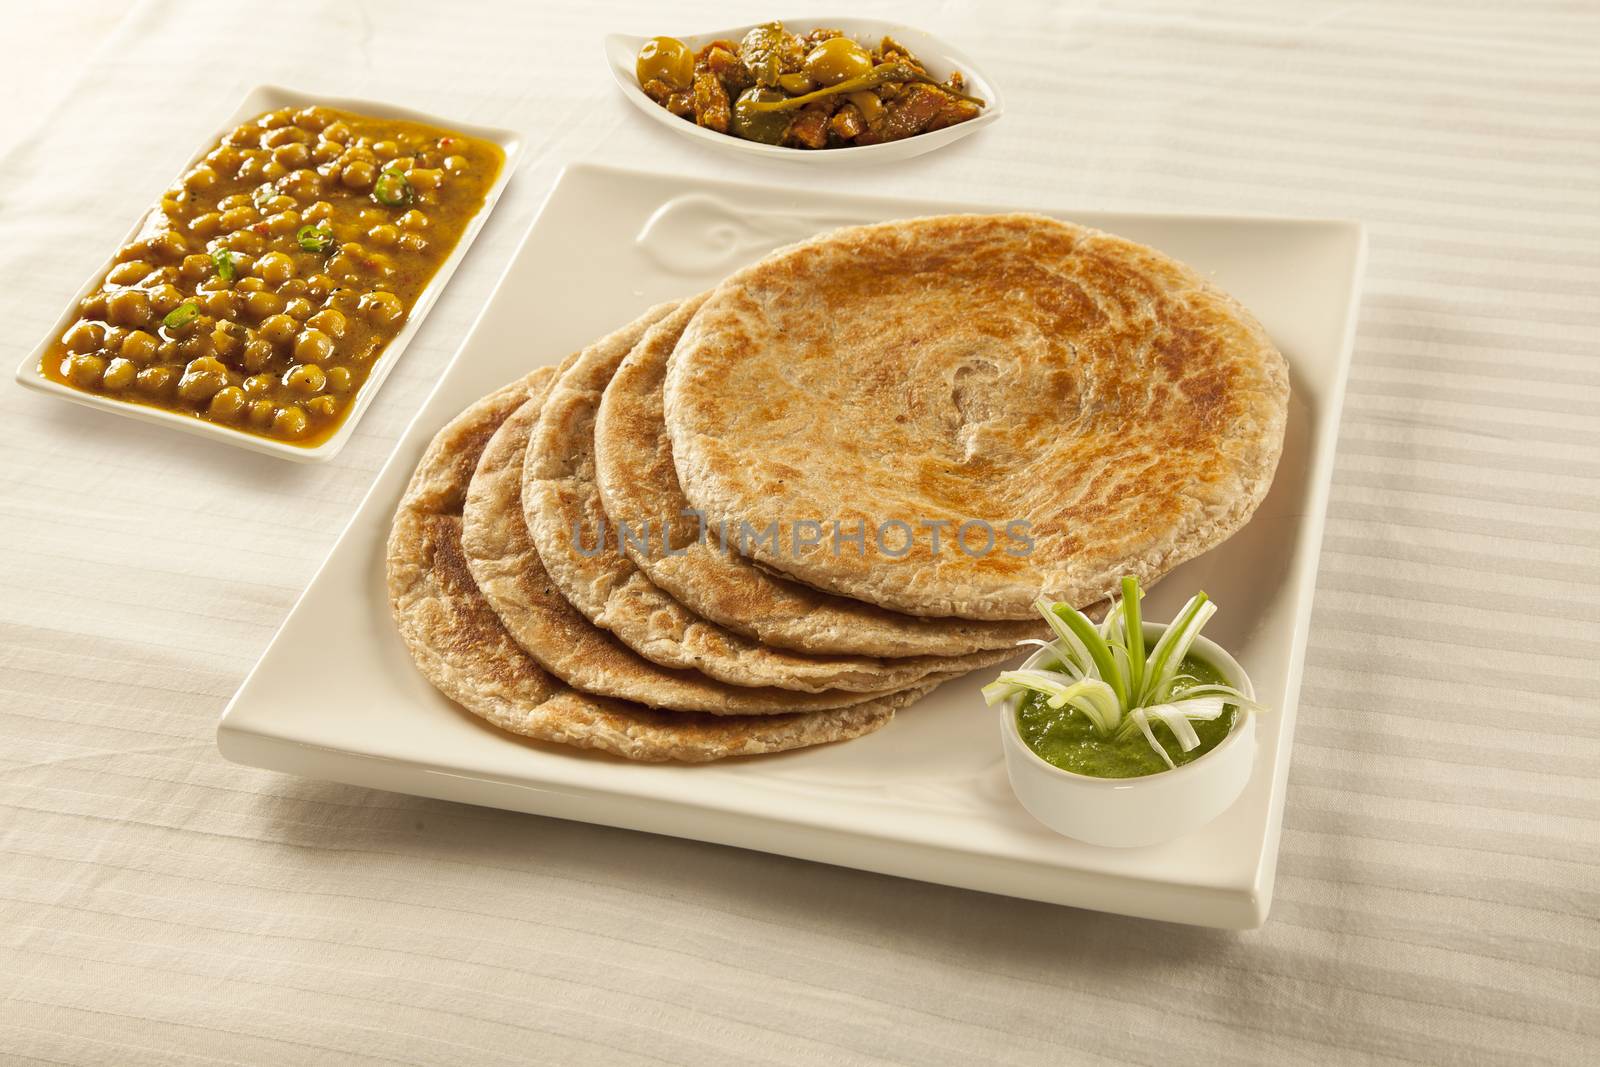 Bran paratha puri served with chickpeas cholay and pickle chutne by haiderazim